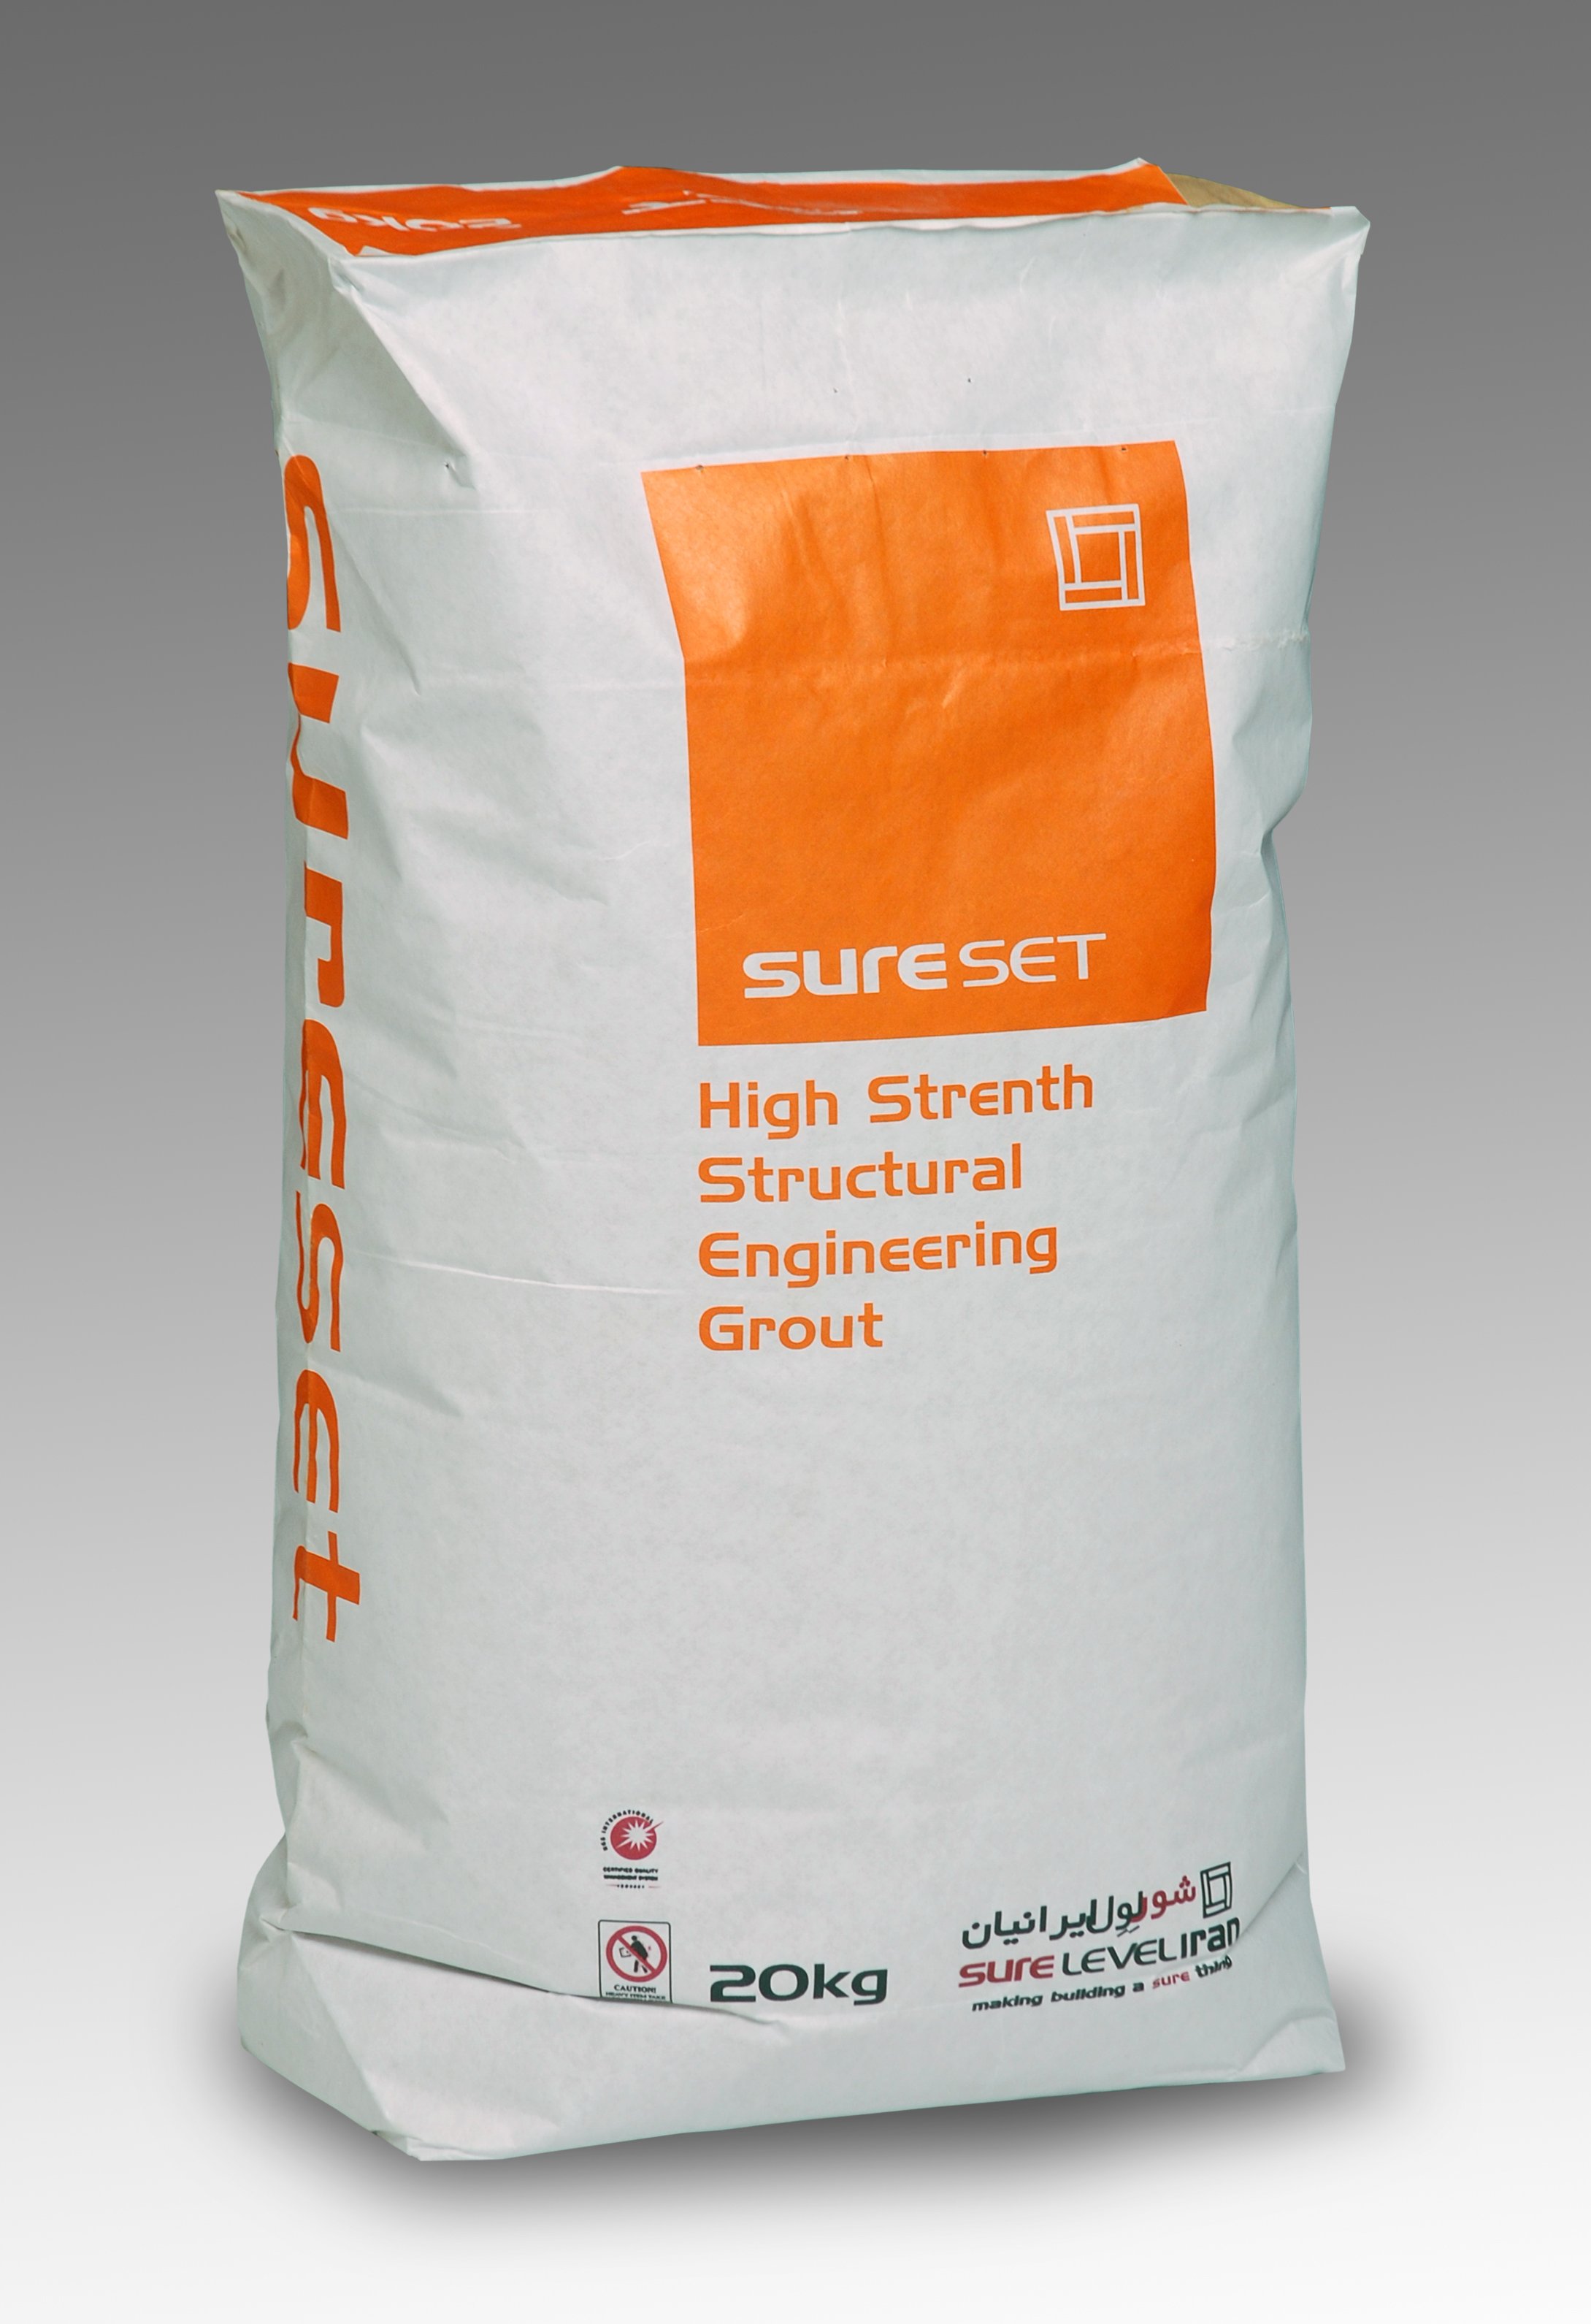 Grout based on high strength cement